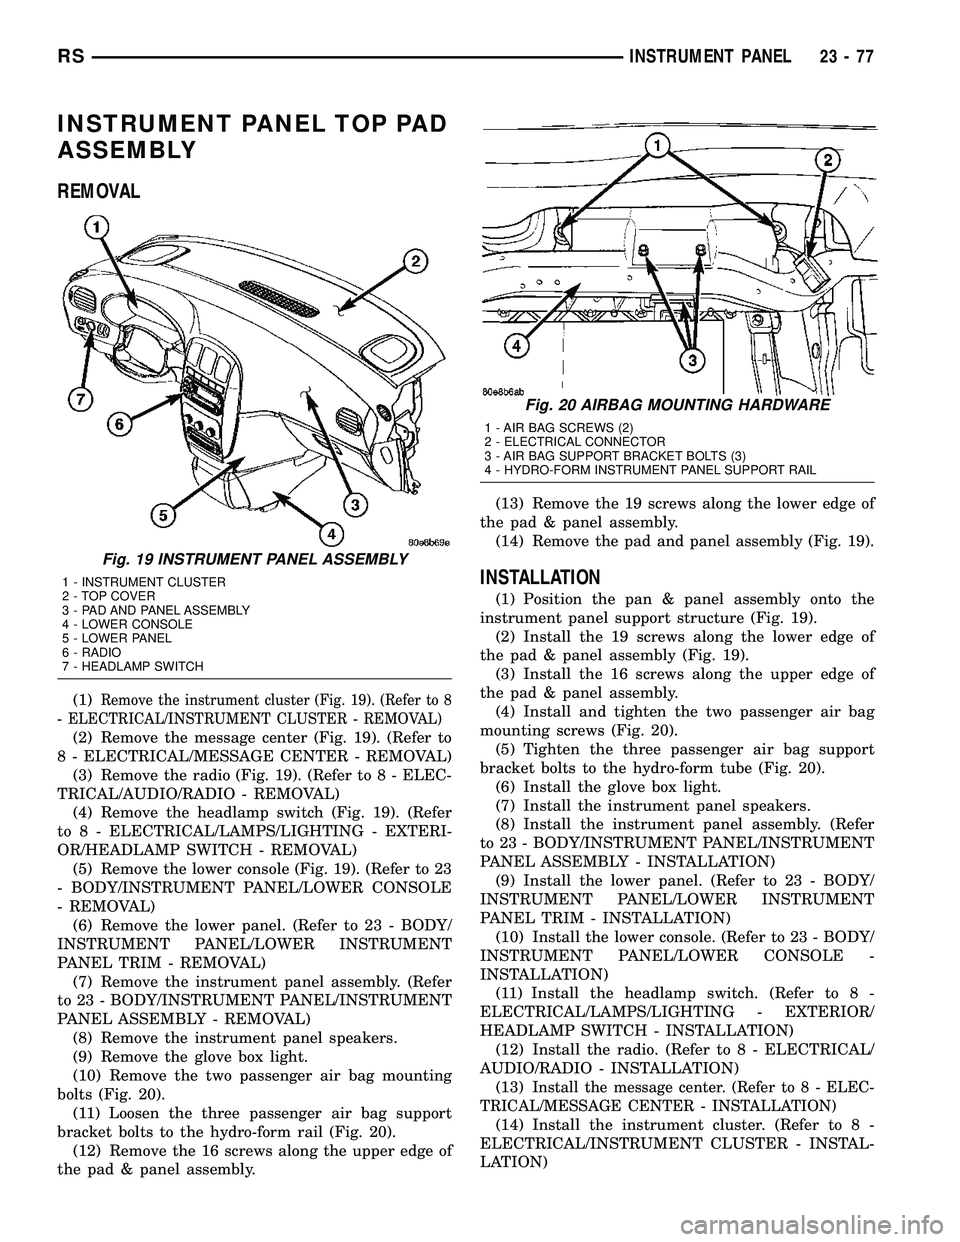 CHRYSLER CARAVAN 2005 Manual PDF INSTRUMENT PANEL TOP PAD
ASSEMBLY
REMOVAL
(1)Remove the instrument cluster (Fig. 19). (Refer to 8
- ELECTRICAL/INSTRUMENT CLUSTER - REMOVAL)
(2) Remove the message center (Fig. 19). (Refer to
8 - ELEC